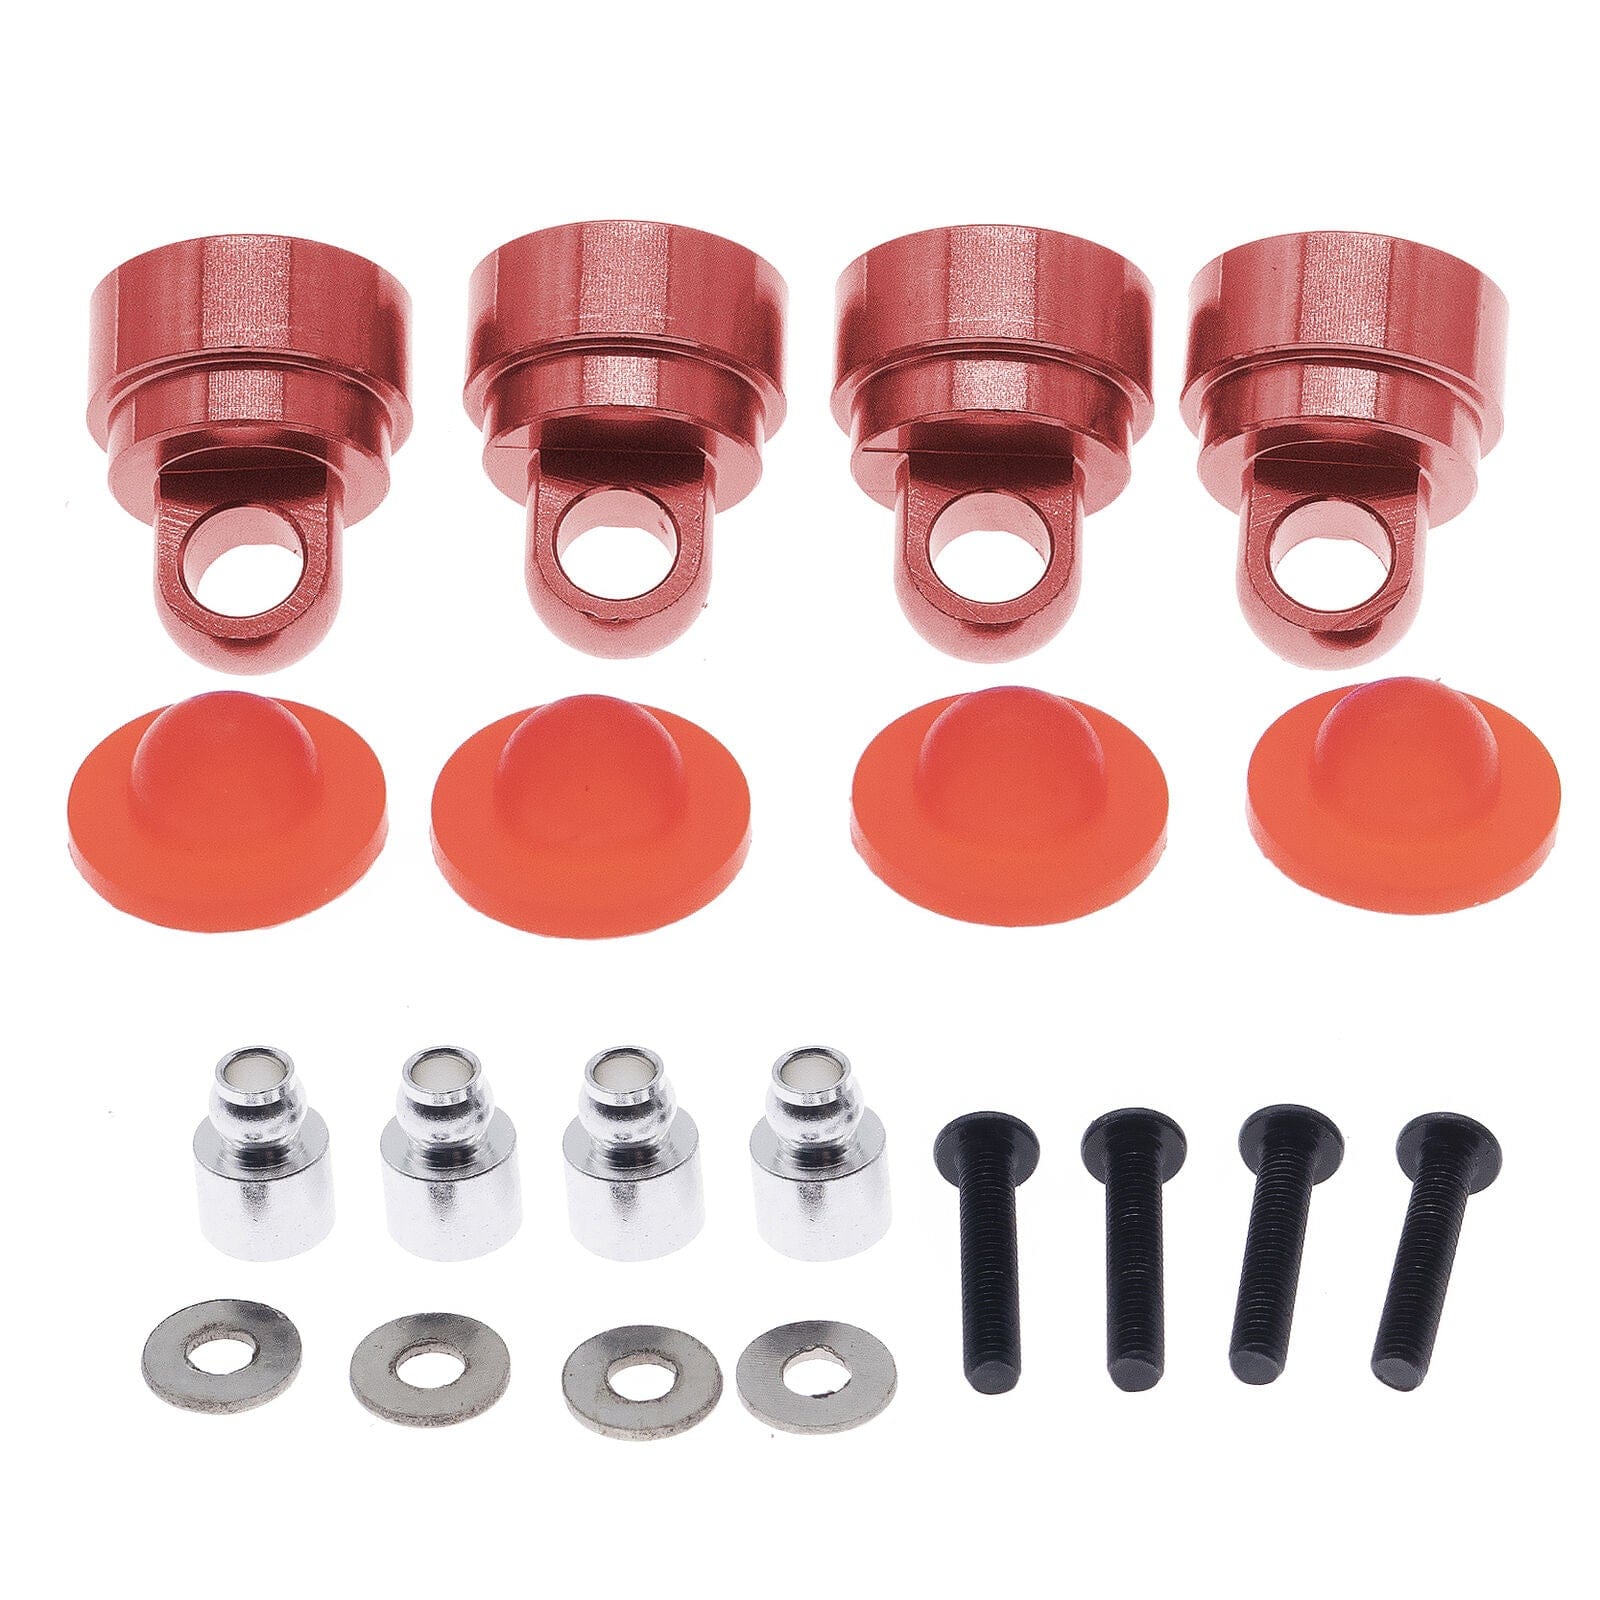 RCAWD ECX UPGRADE PARTS RCAWD Alloy Shock Cap Piston Pivot Ball Set for All ECX 1/10 2WD Series